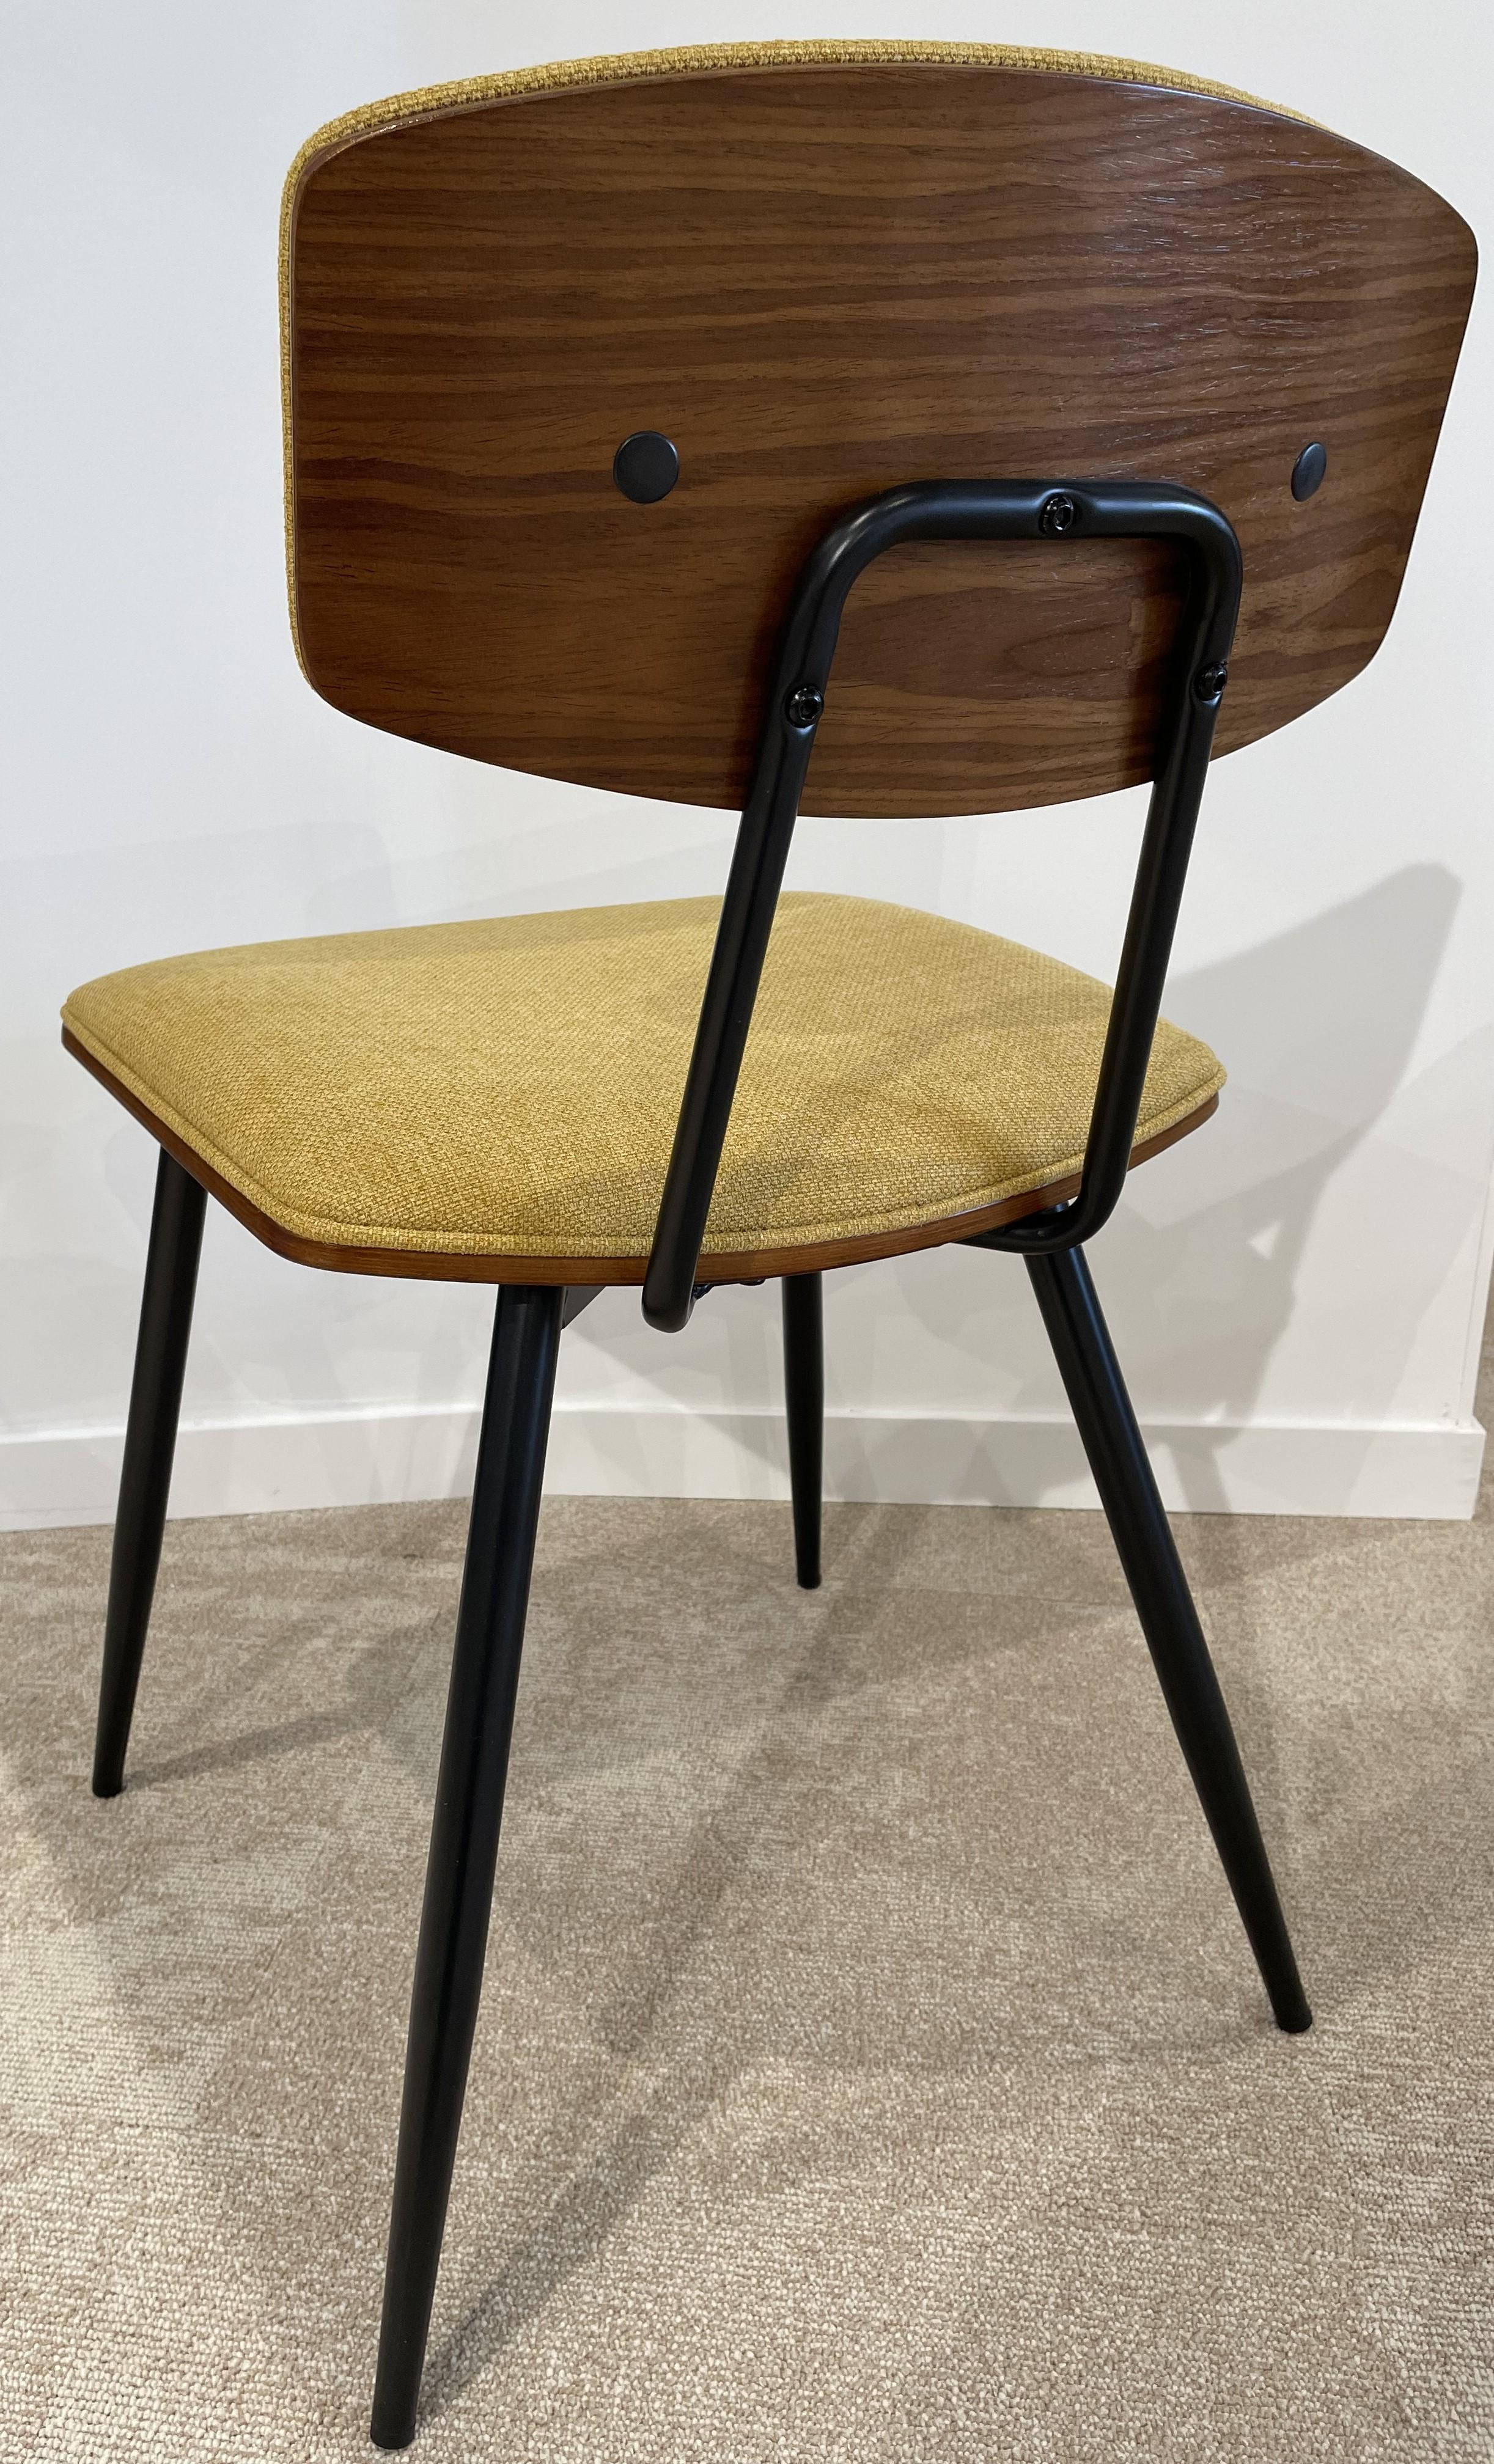 Contemporary 1950s Design and Mid Century Design Style Plywood, Black Metal and Fabric Chair For Sale